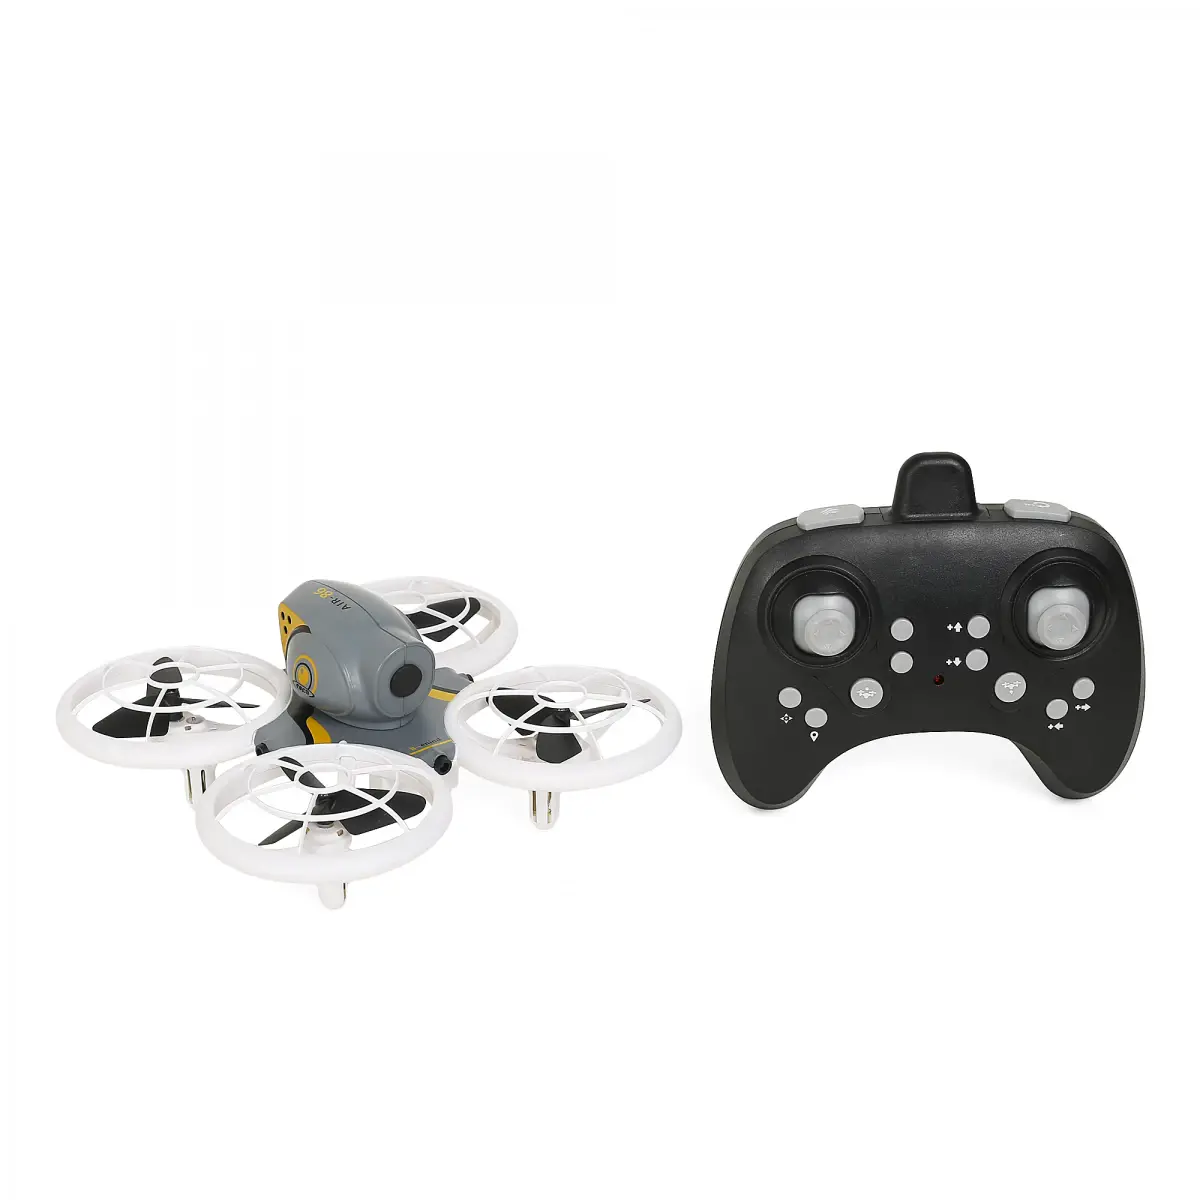 Ralleyz Dazzling Drone with LED Lights, 14Y+, White